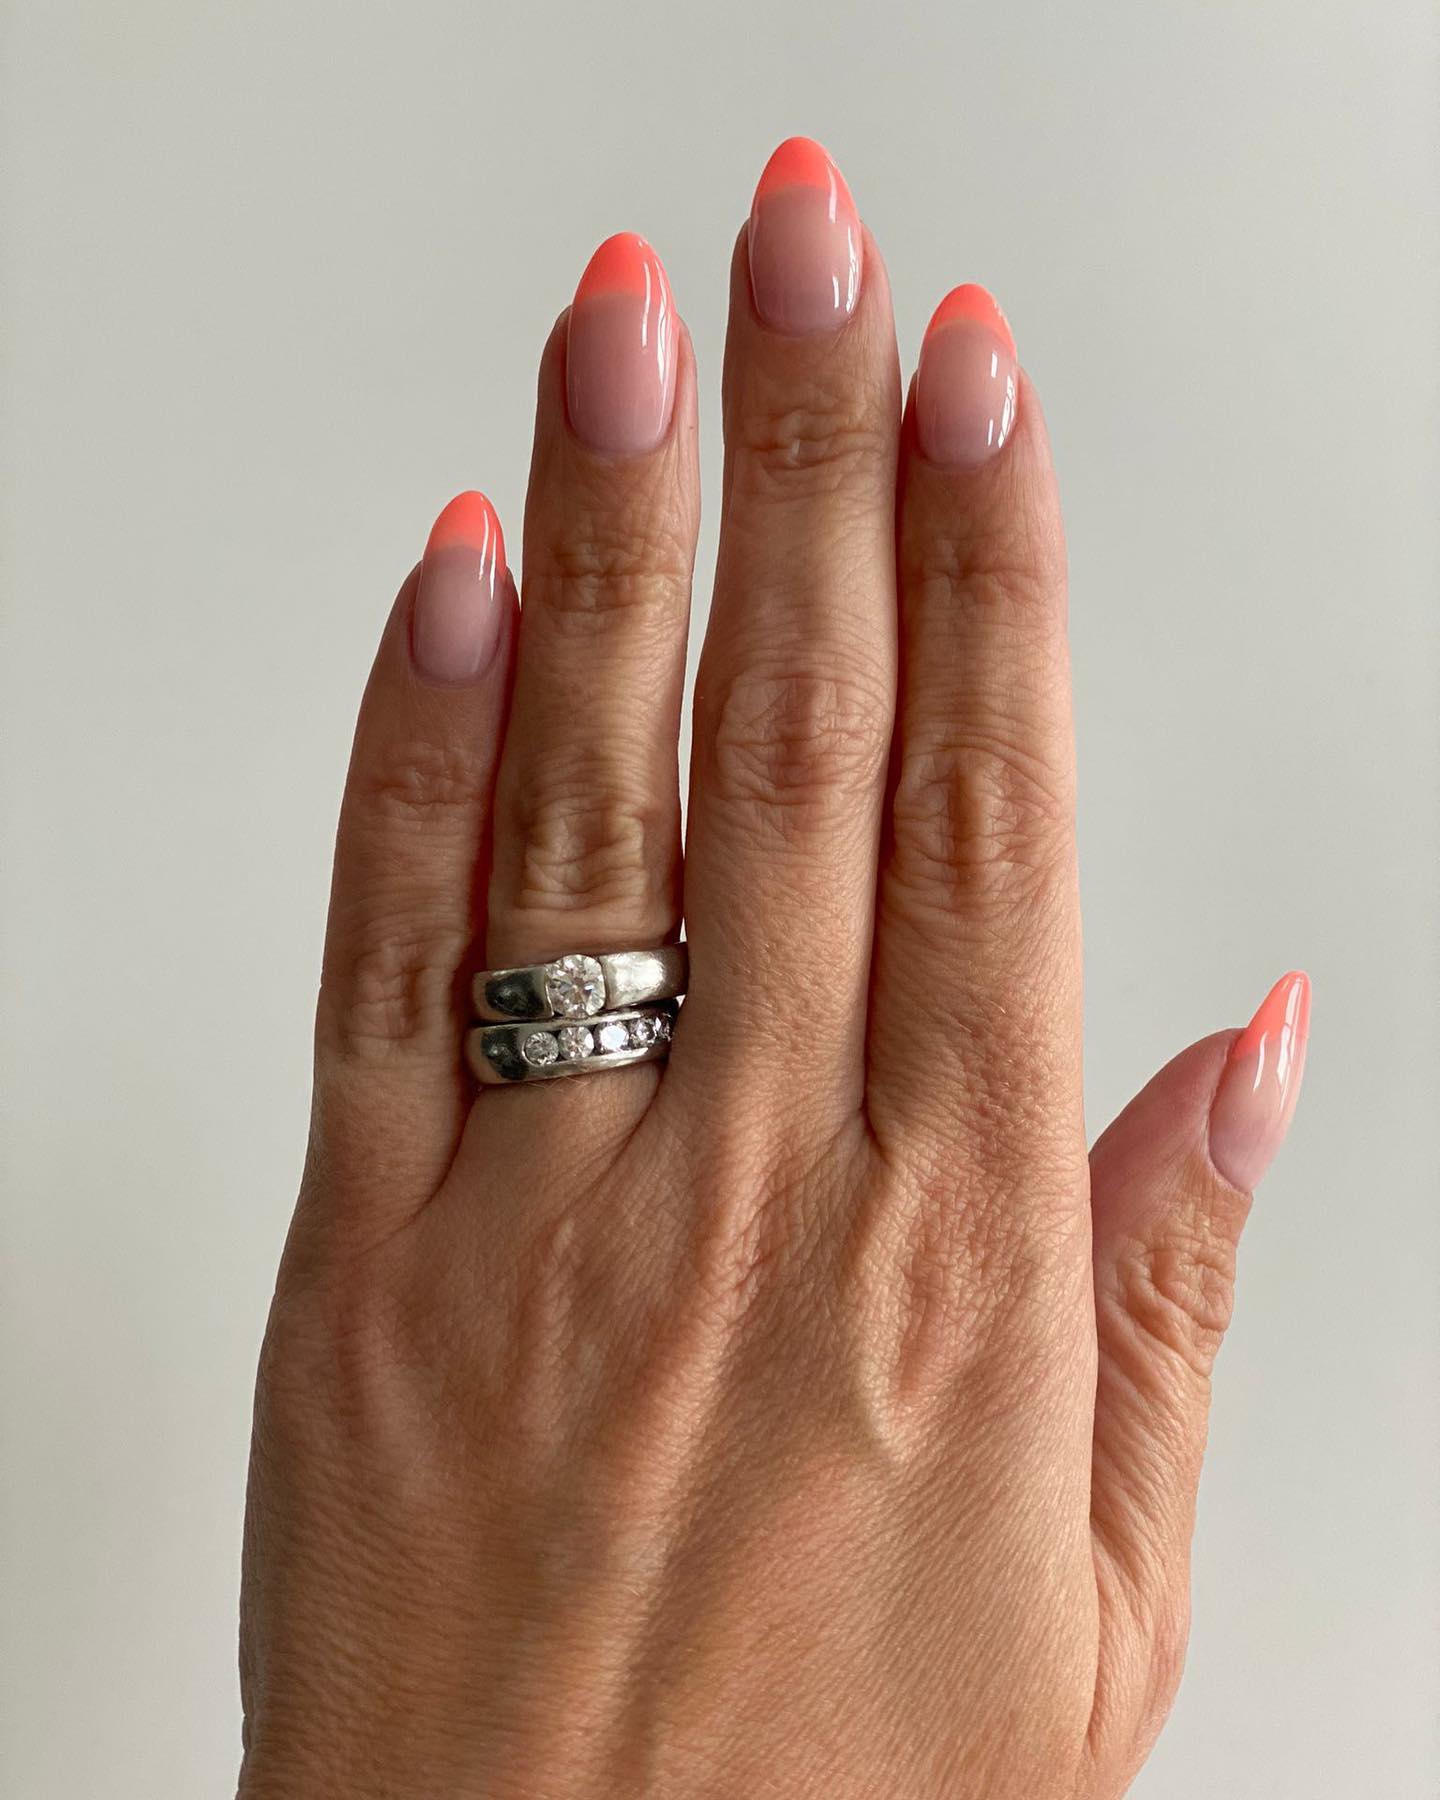 Oval nails such as these and this coral shade will look amazing for the spring and summer seasons.